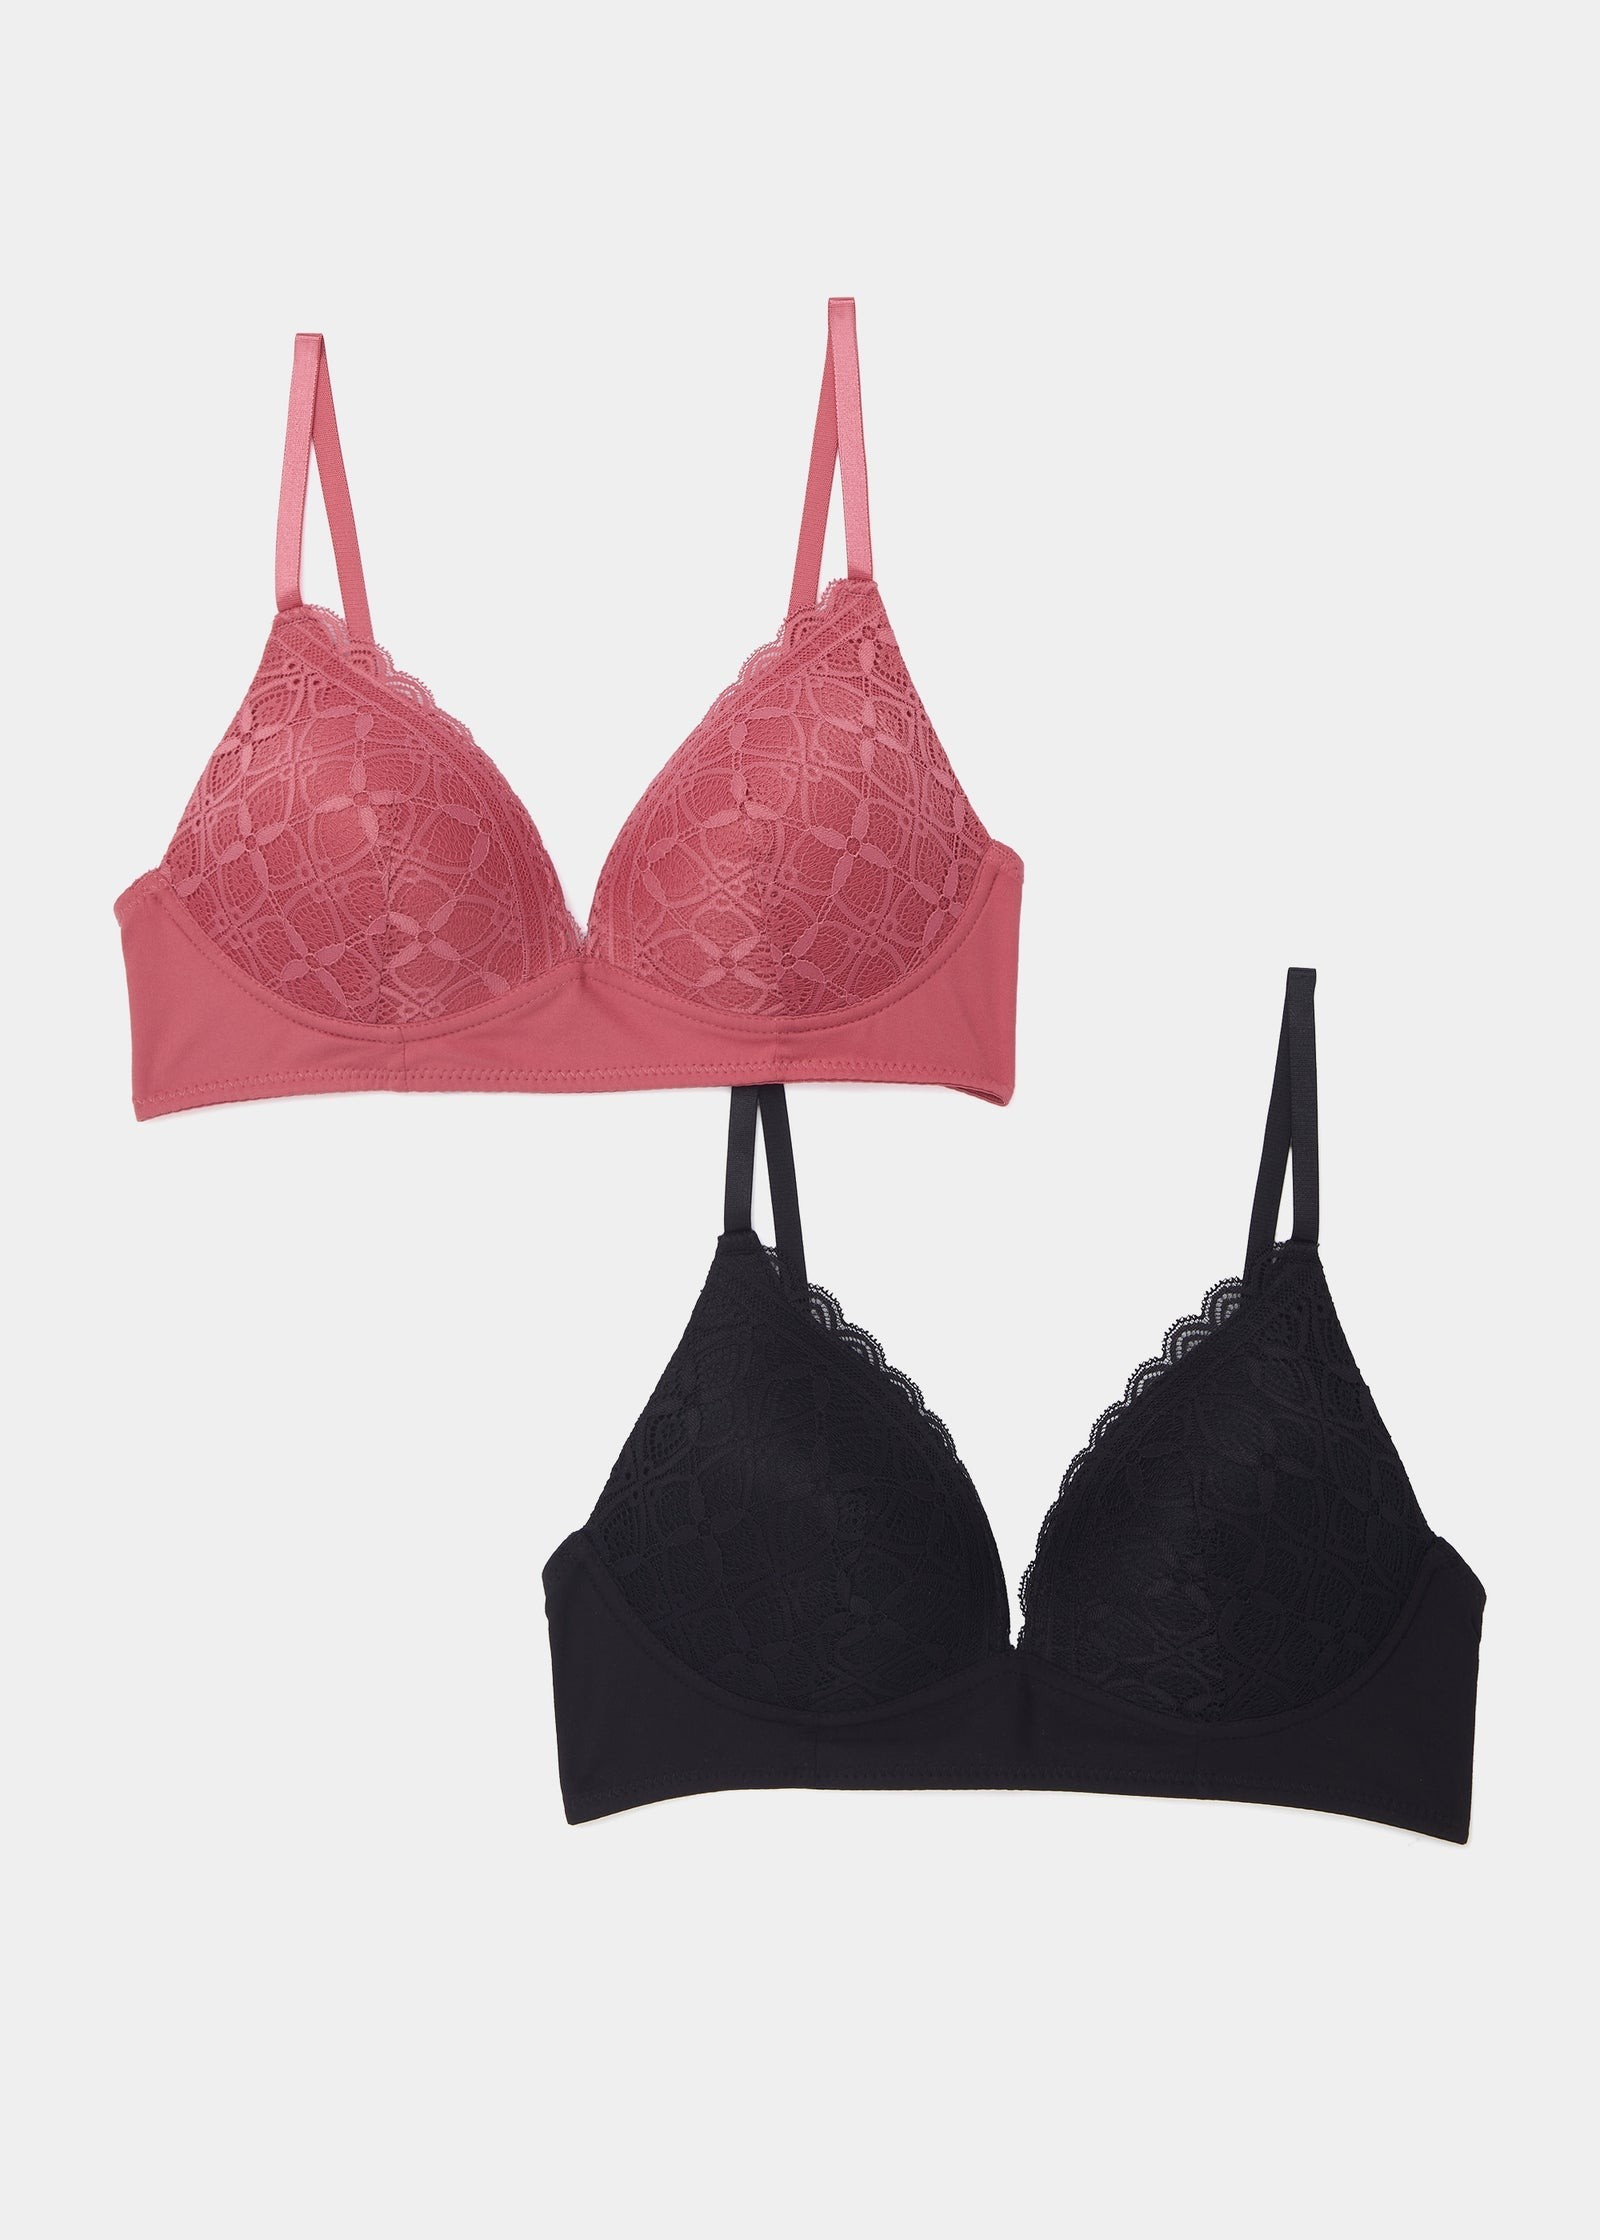 Buy 3 Pack Padded Non Wired Bras Online in UAE from Matalan